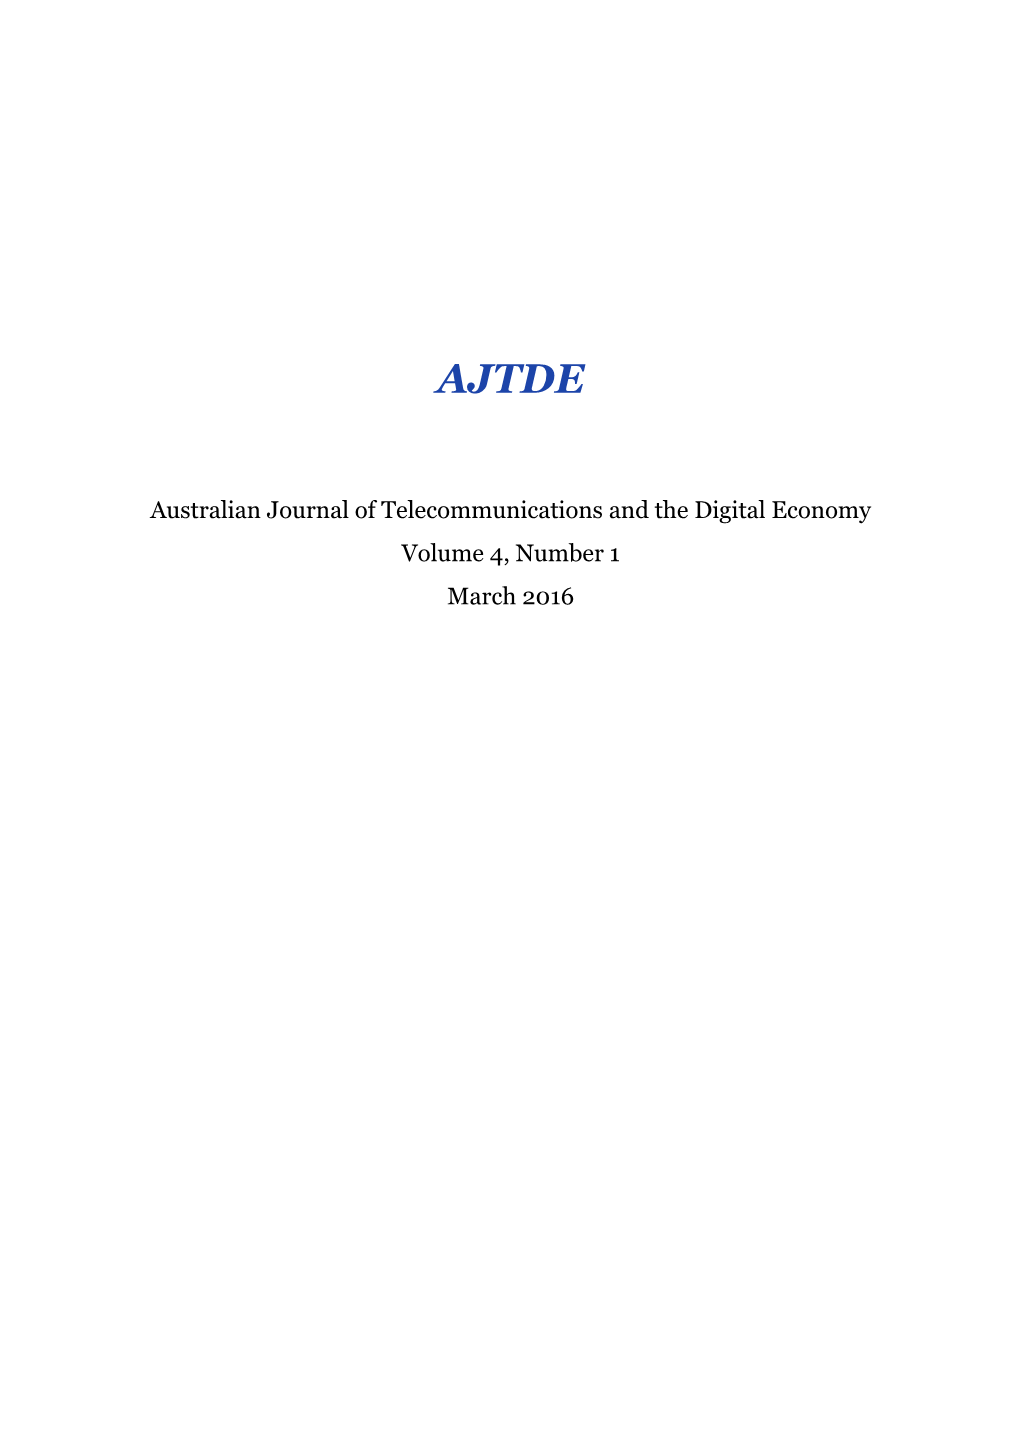 Australian Journal of Telecommunications and the Digital Economy Volume 4, Number 1 March 2016 Australian Journal of Telecommunications and the Digital Economy